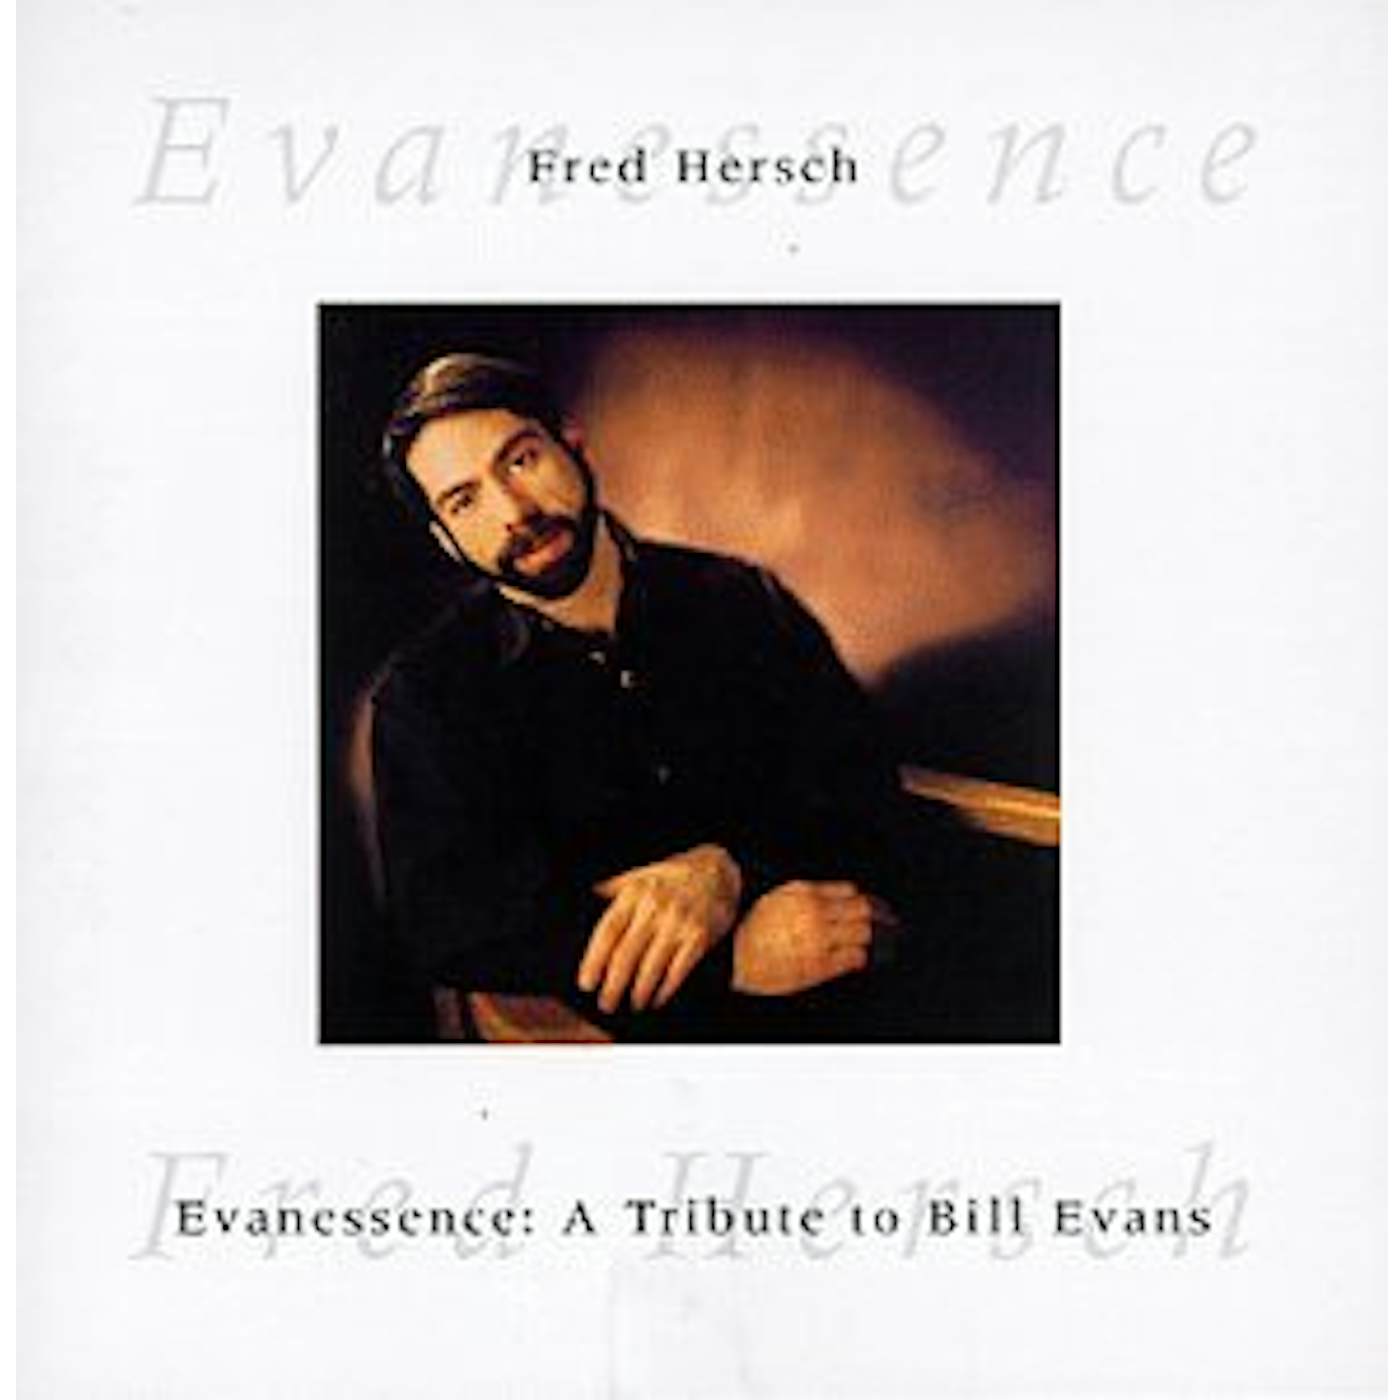 Fred Hersch EVANESSENCE: TRIBUTE TO BILL EVANS CD